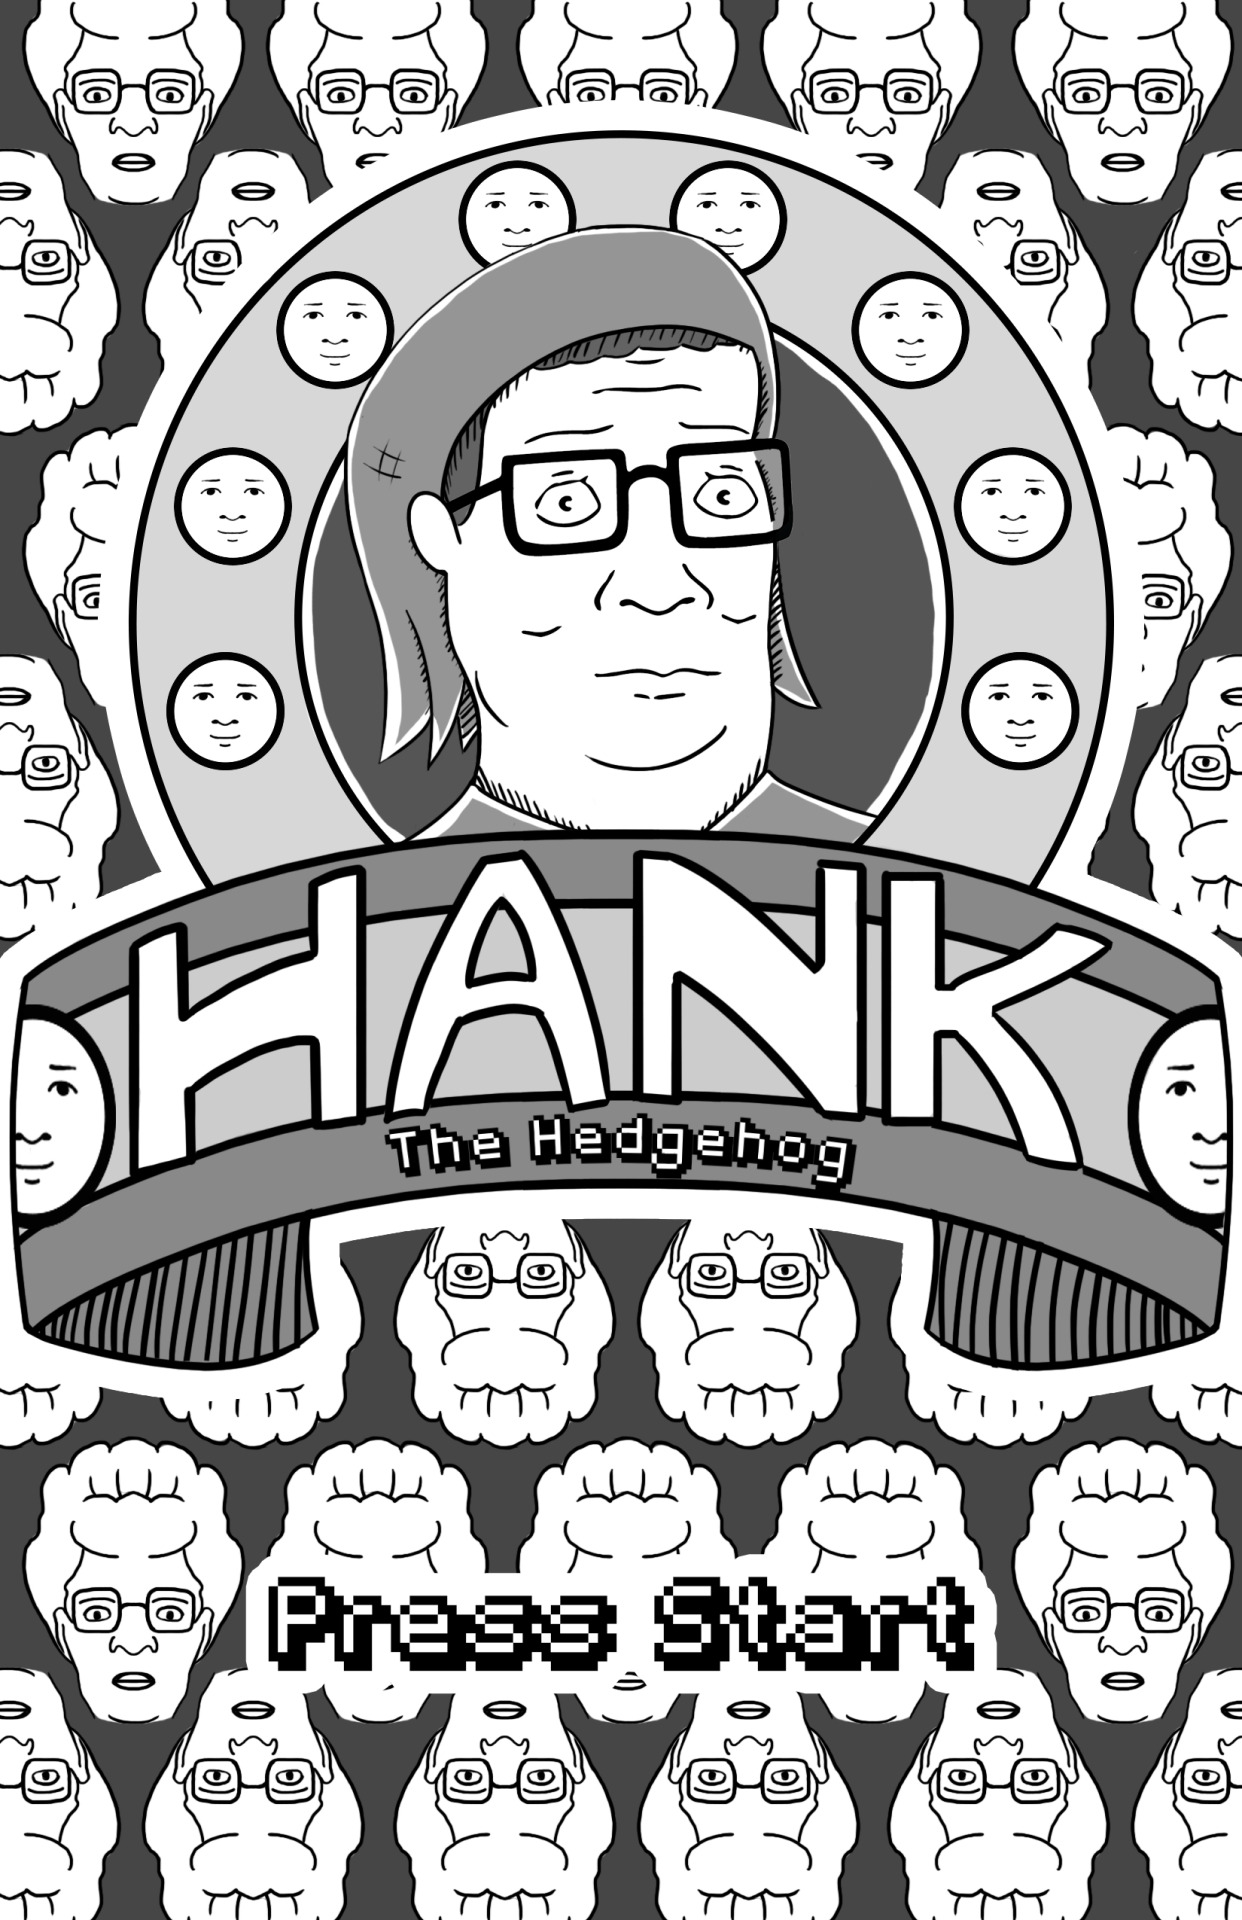 king-zanziba:
“Hank Hill Zine!
Not rally sure what happened here, but I like it.
A submission to this Zine: http://blankhillzine.tumblr.com/
”
new BLANK HILL ZINE submission by Ben Avison aka king-zanziba
http://king-zanziba.tumblr.com/
« Submit to...